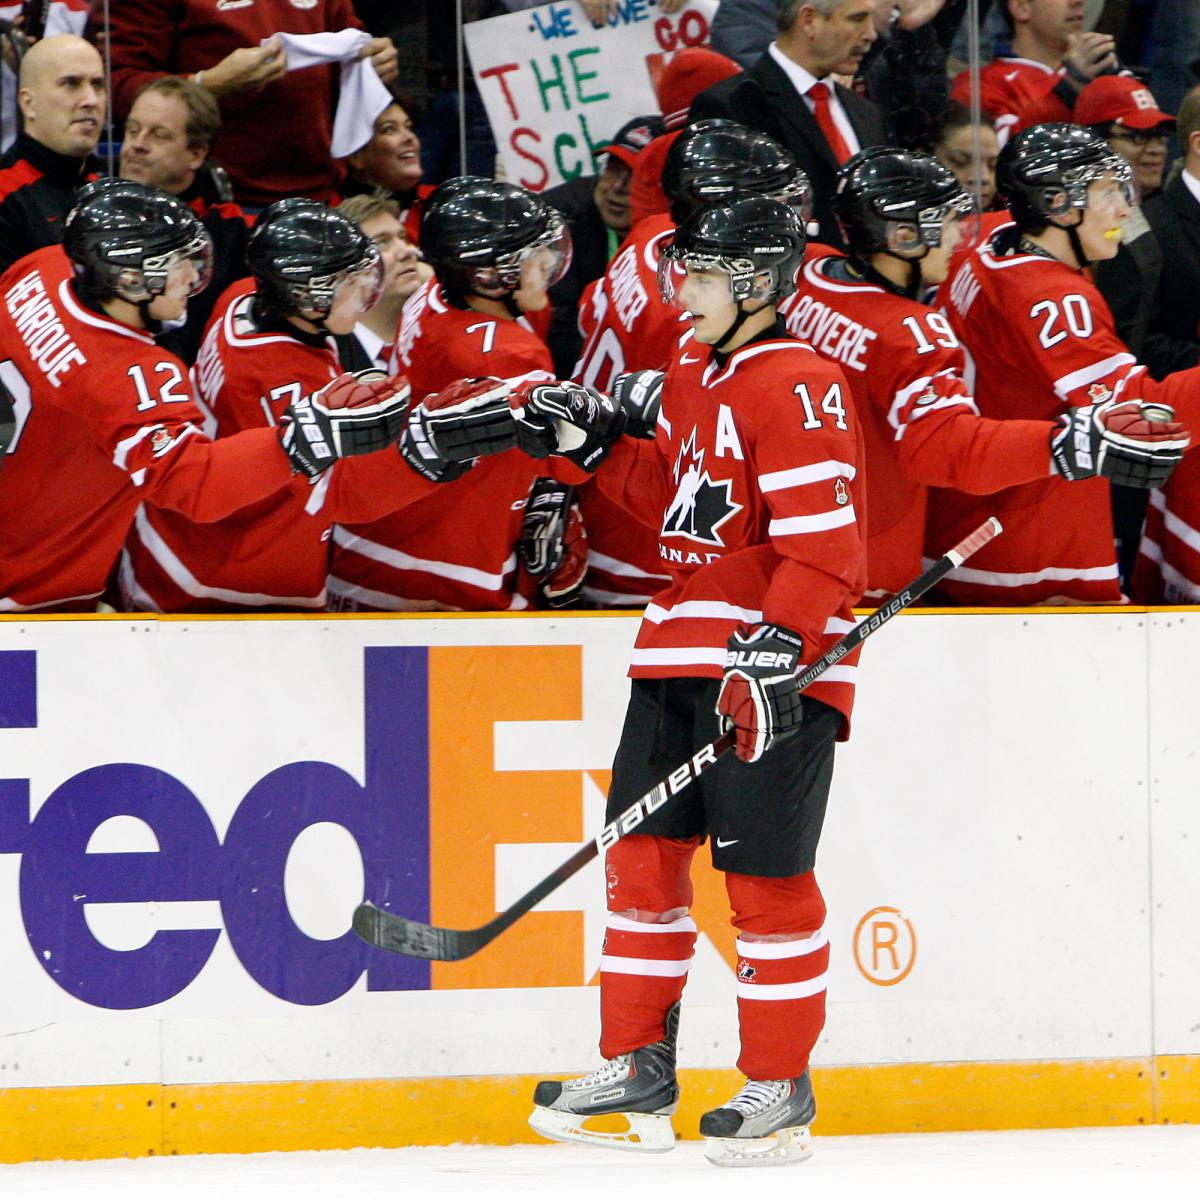 World Juniors: Remembering the 2005 All-Star team - Team Canada